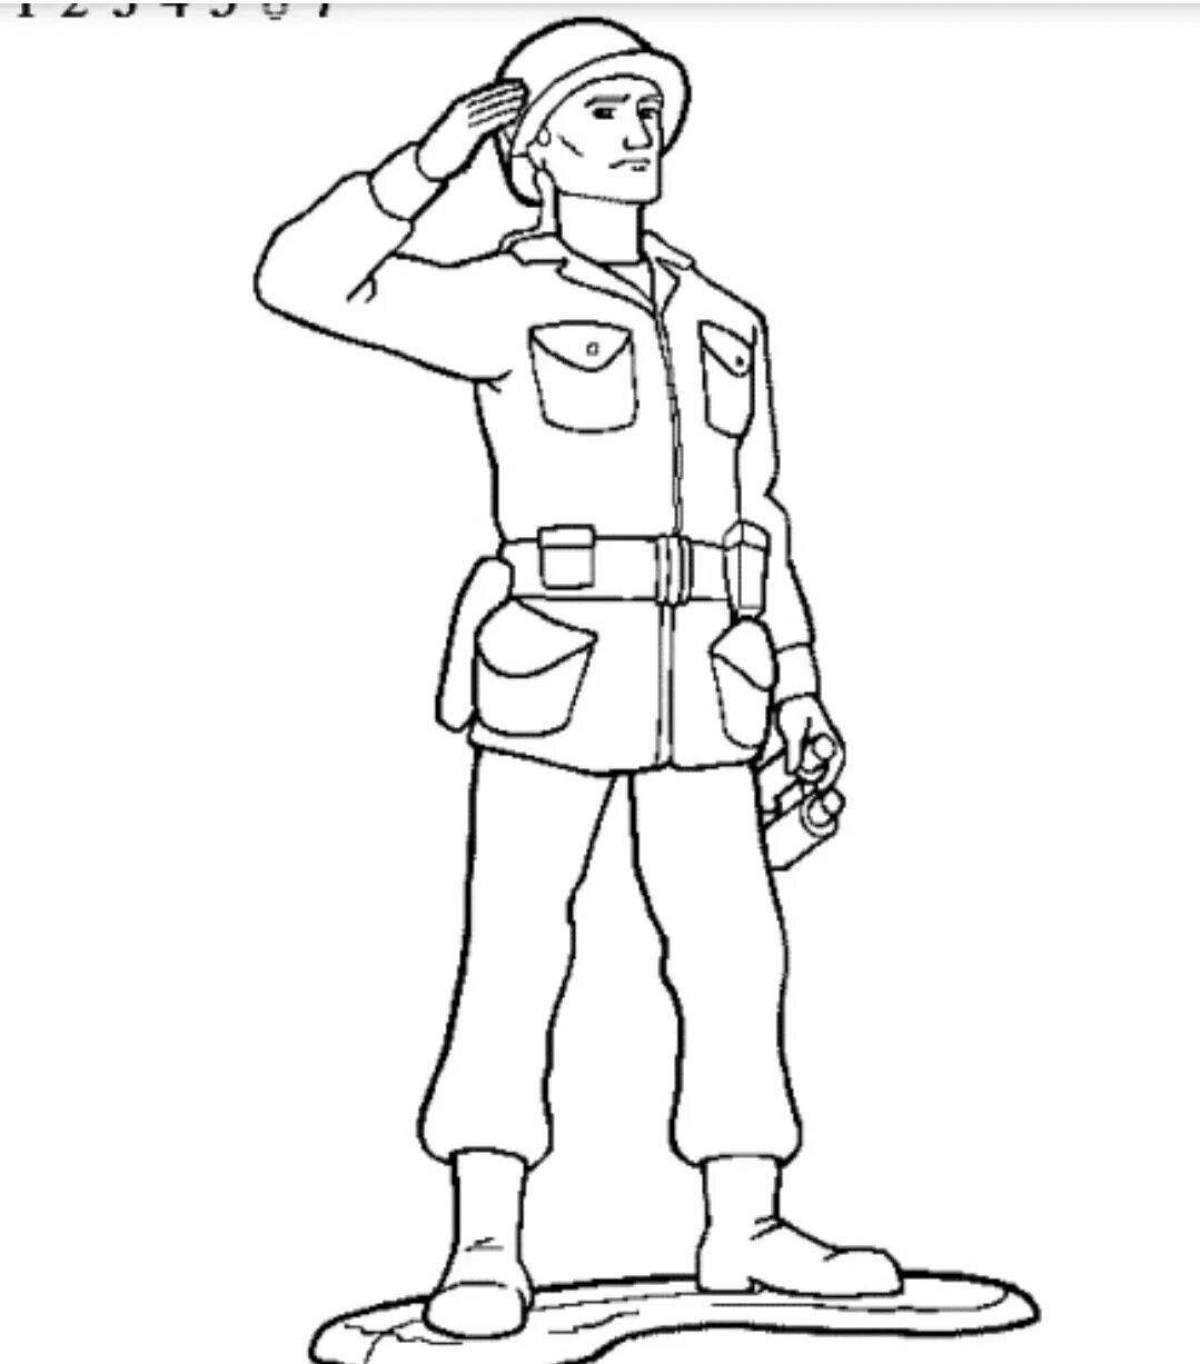 Domestic military coloring